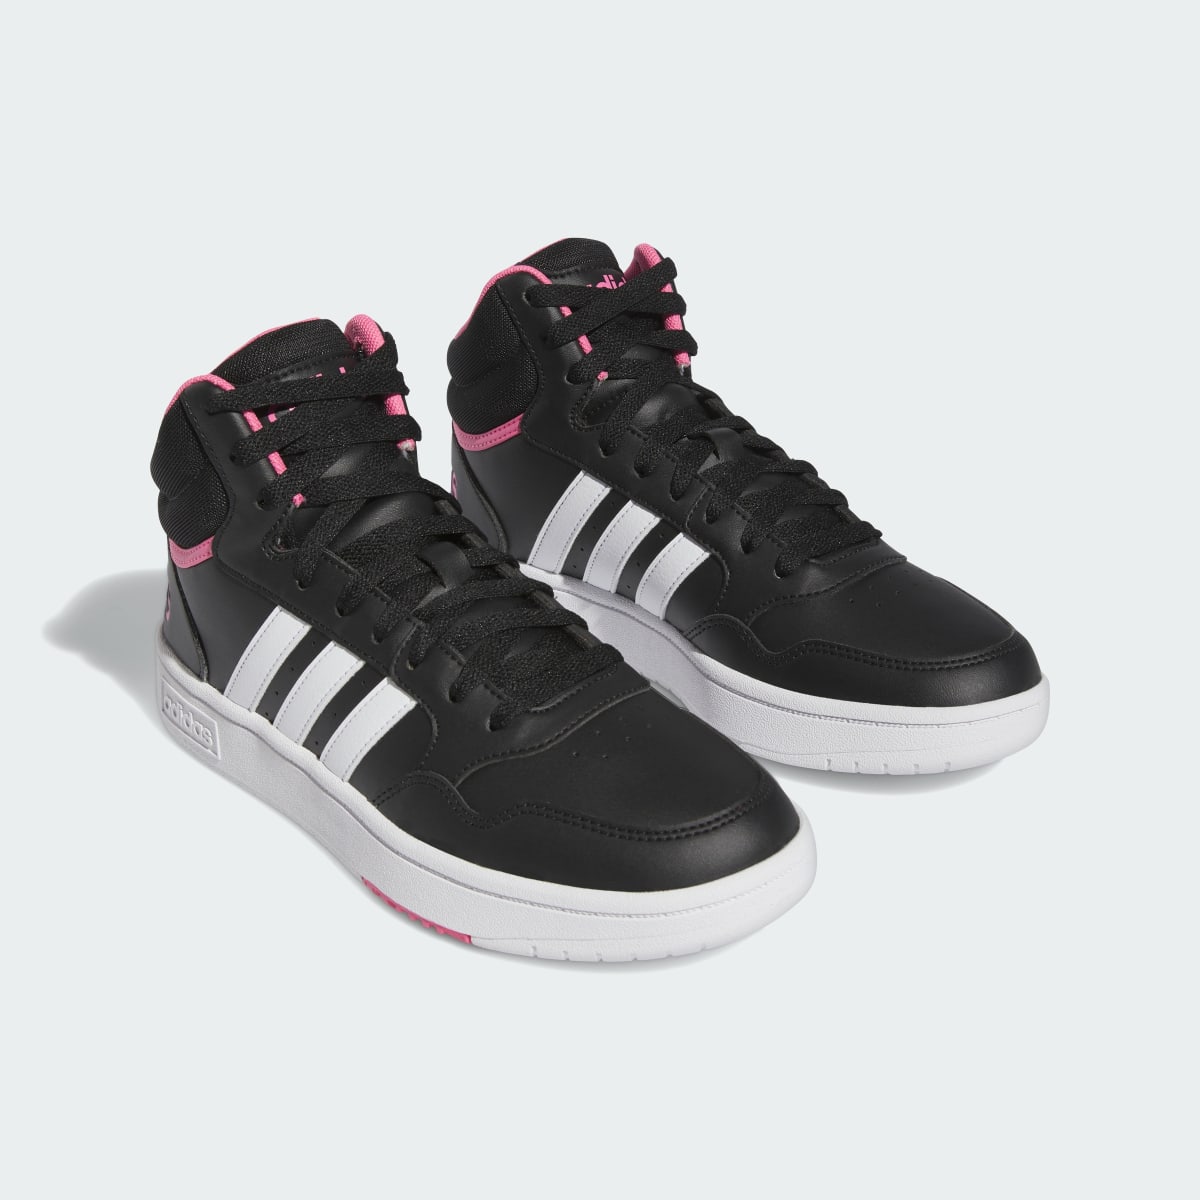 Adidas Hoops 3.0 Mid Shoes. 5